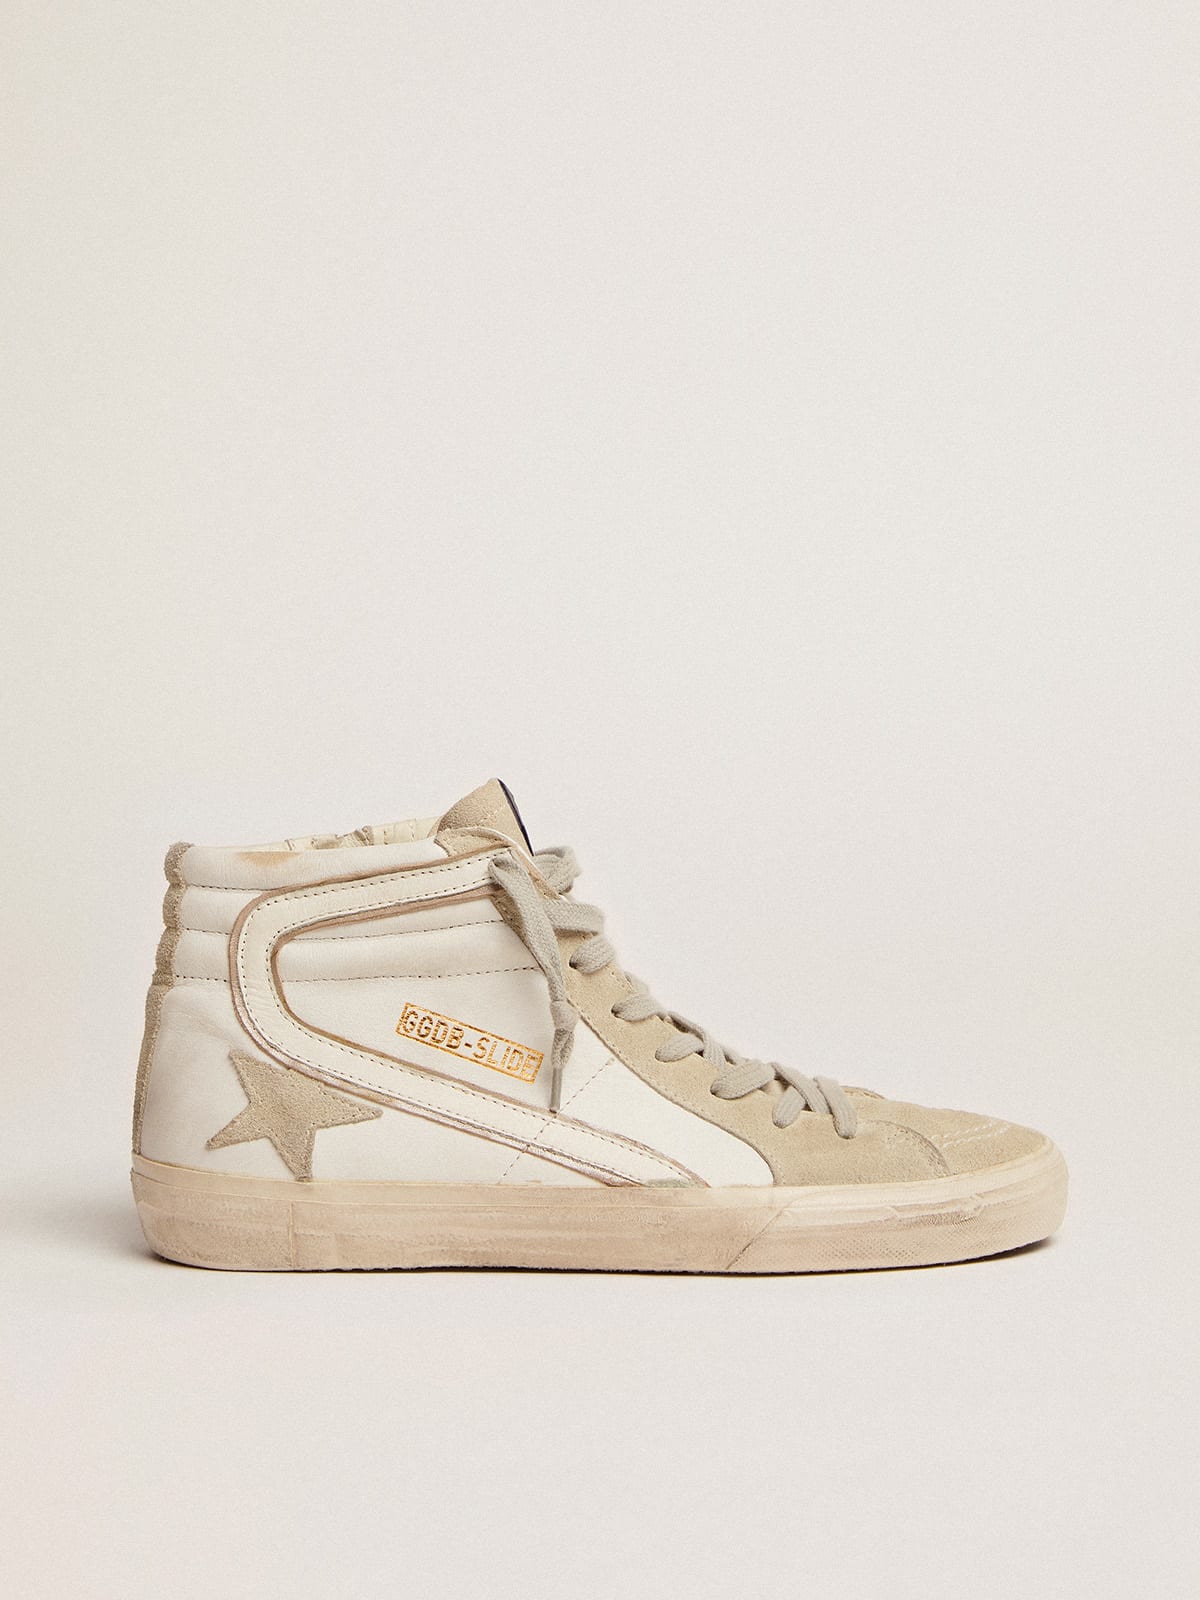 White Slide sneakers in leather and suede | Golden Goose